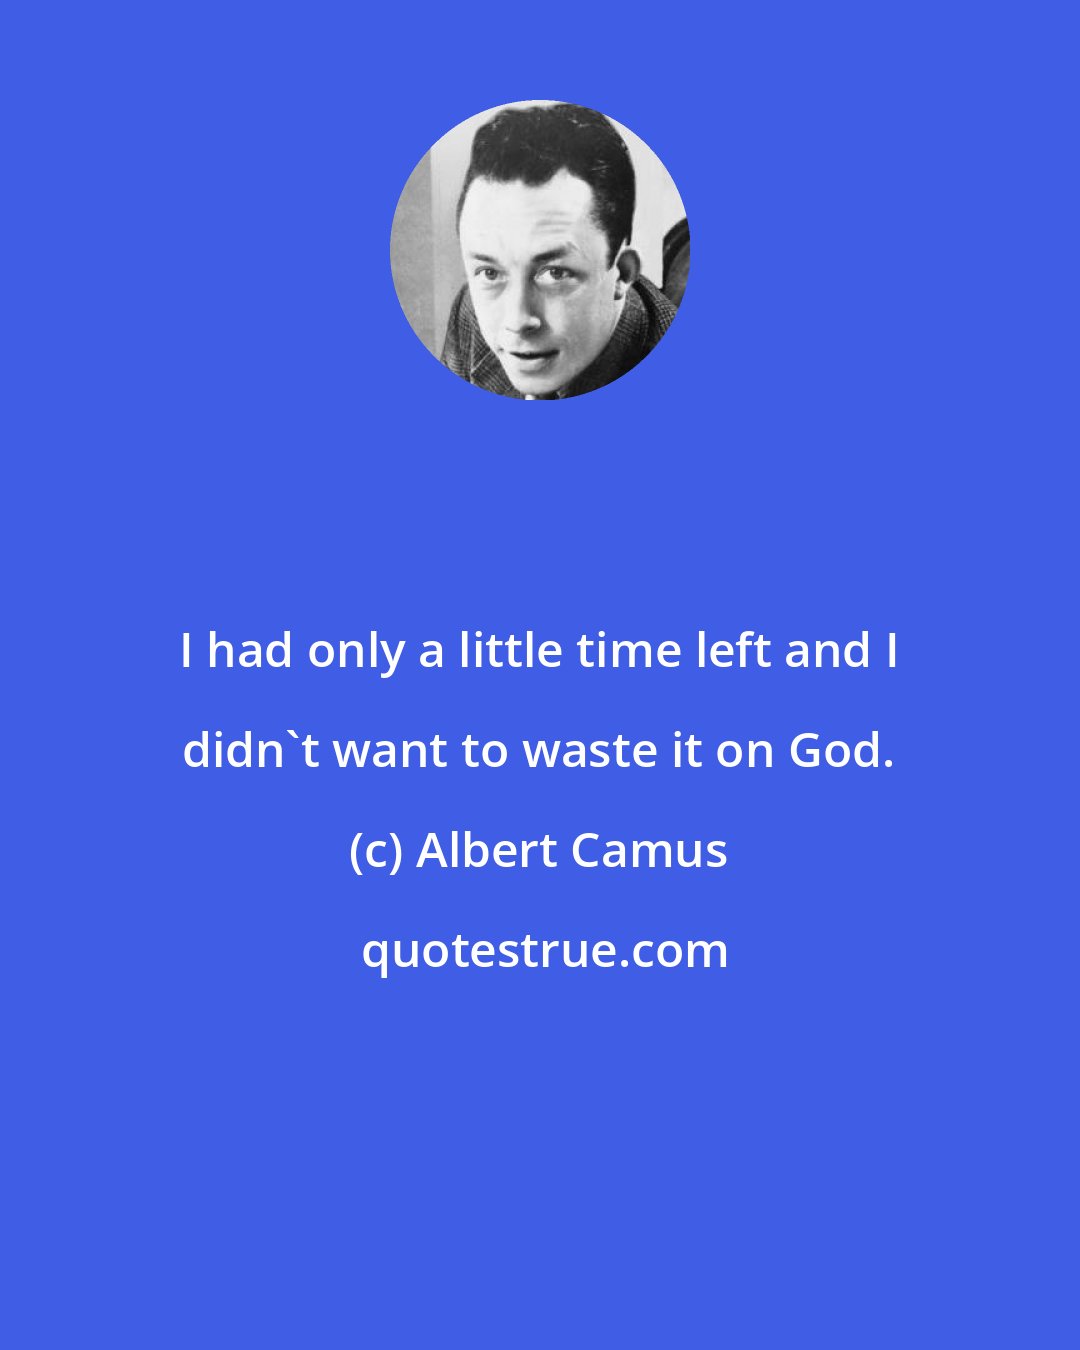 Albert Camus: I had only a little time left and I didn't want to waste it on God.